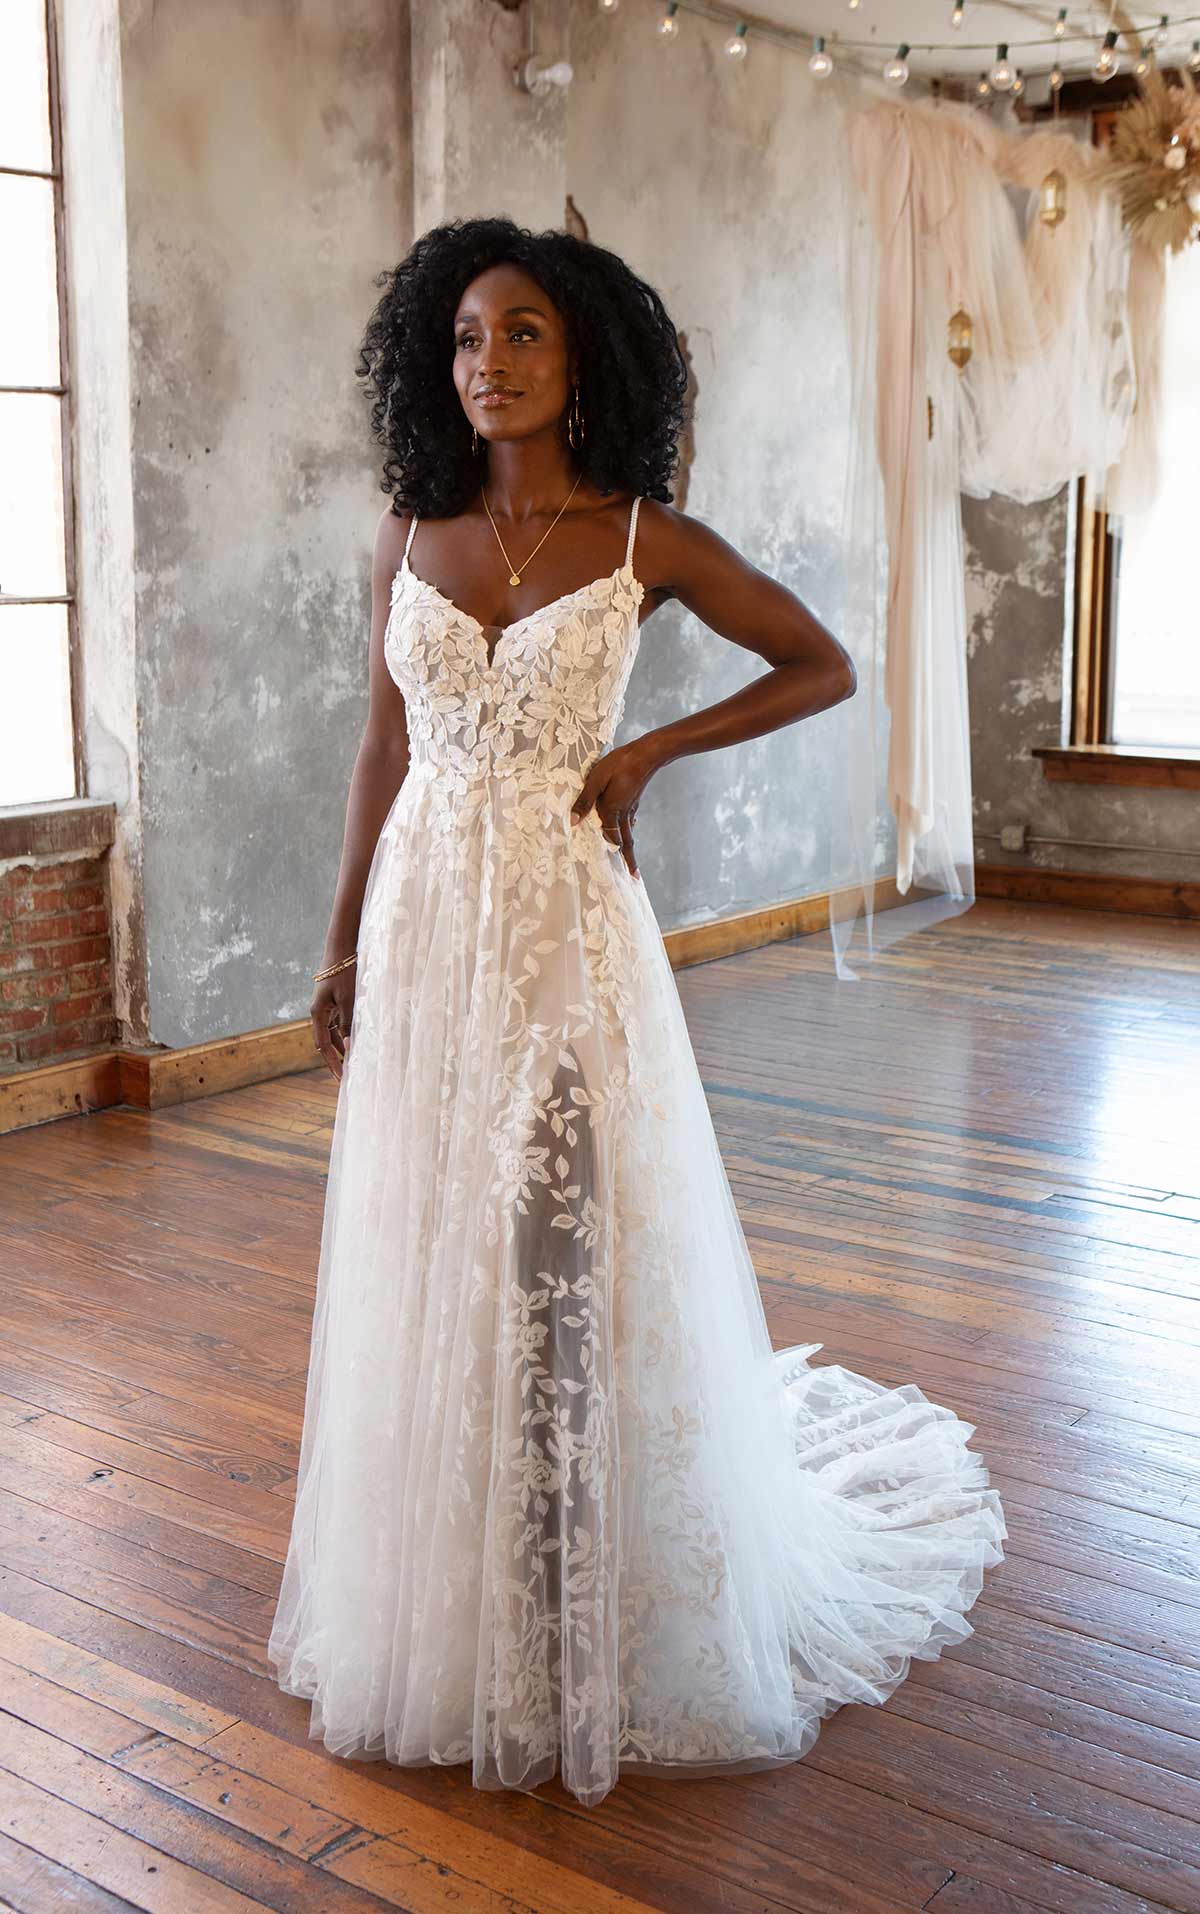 Lace A-line Wedding Dress With Spaghetti Straps